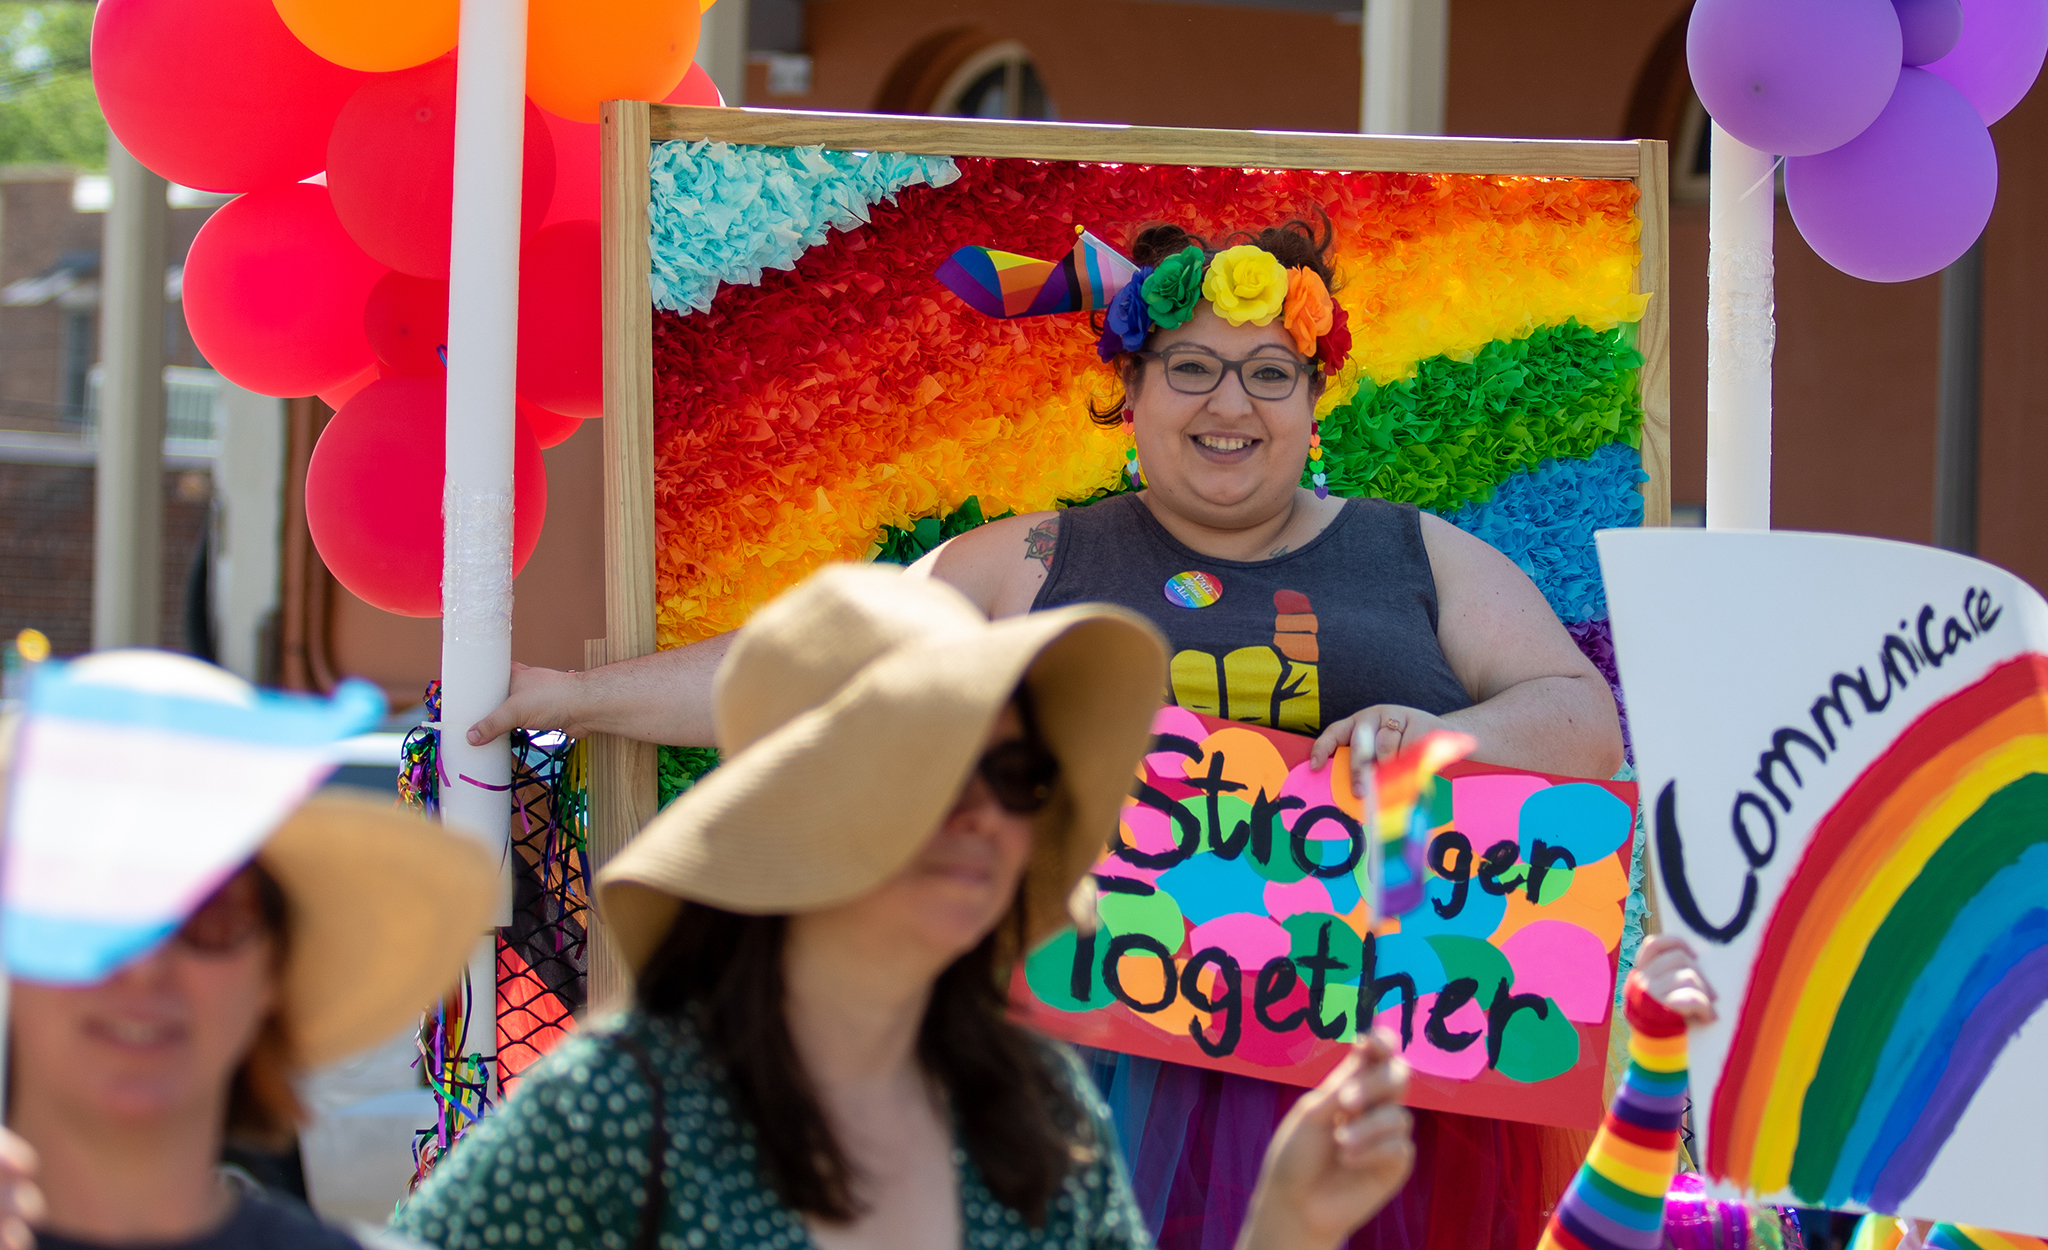 Oxford Pride Week celebrations begin April 30 with multiple events scheduled, including an Interfaith service, poetry reading, movie night and the annual Oxford Pride Parade. The parade, set for 2 p.m. May 6, starts at the Oxford-University Depot. Submitted photo